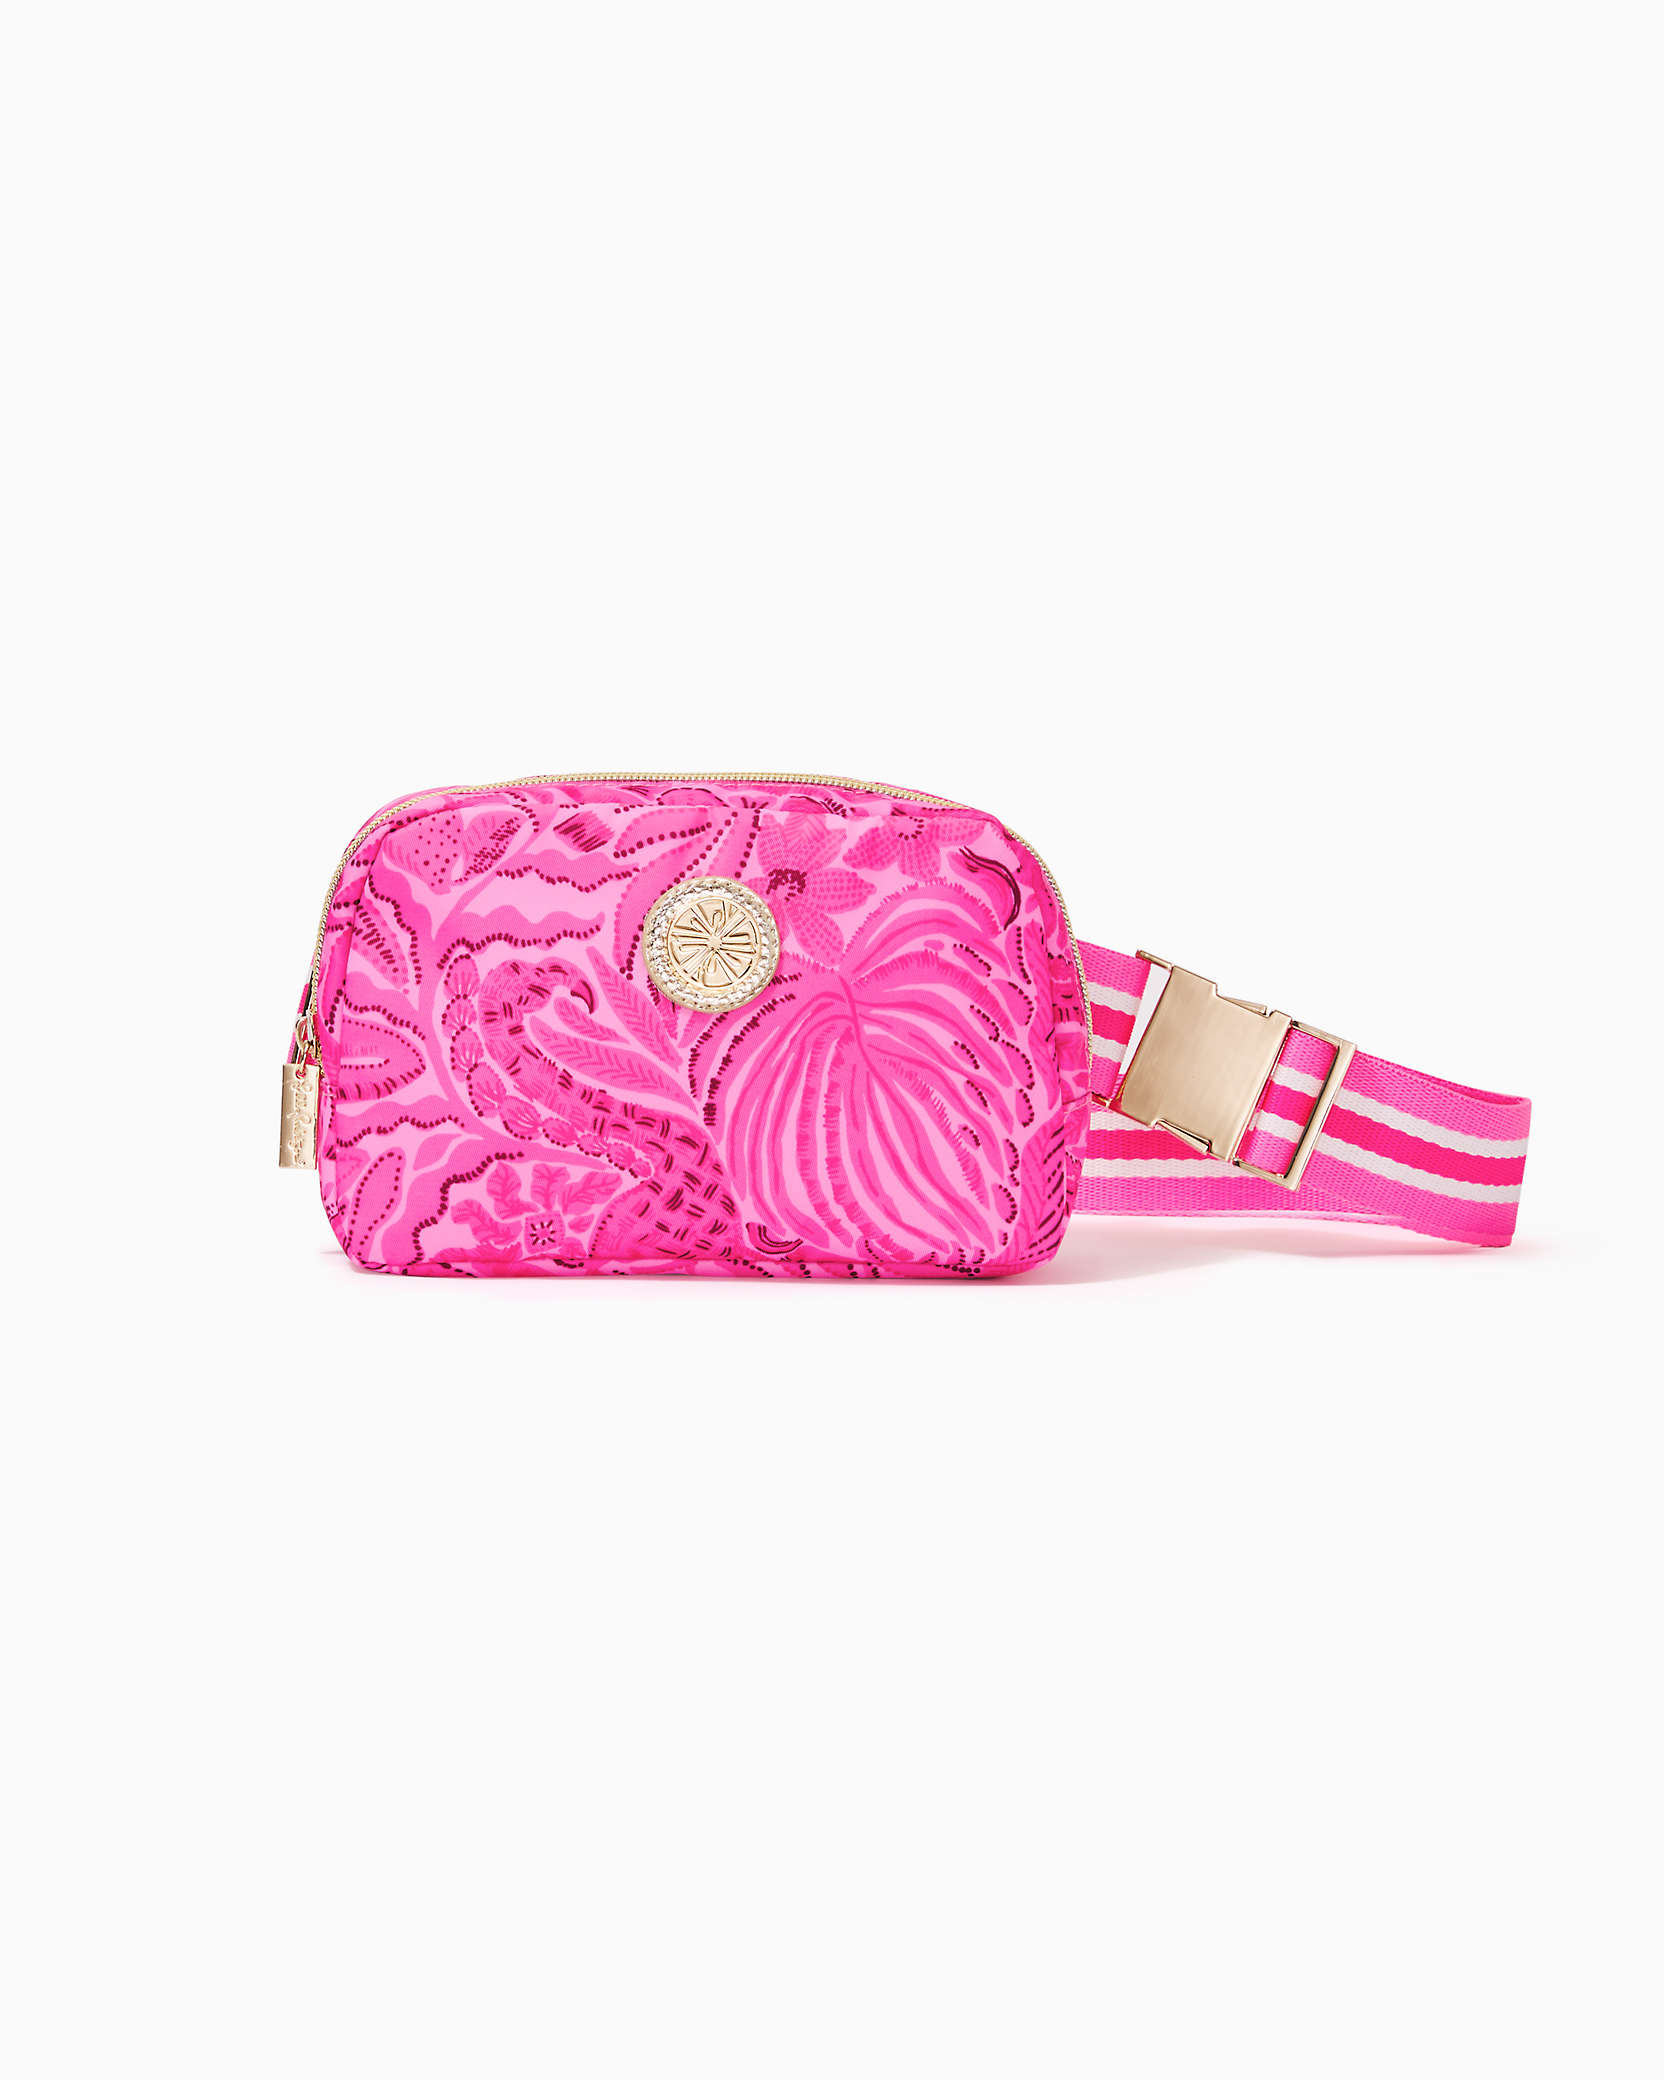 Lilly Pulitzer Jeanie Belt Bag In Cerise Pink Pinkie Promises